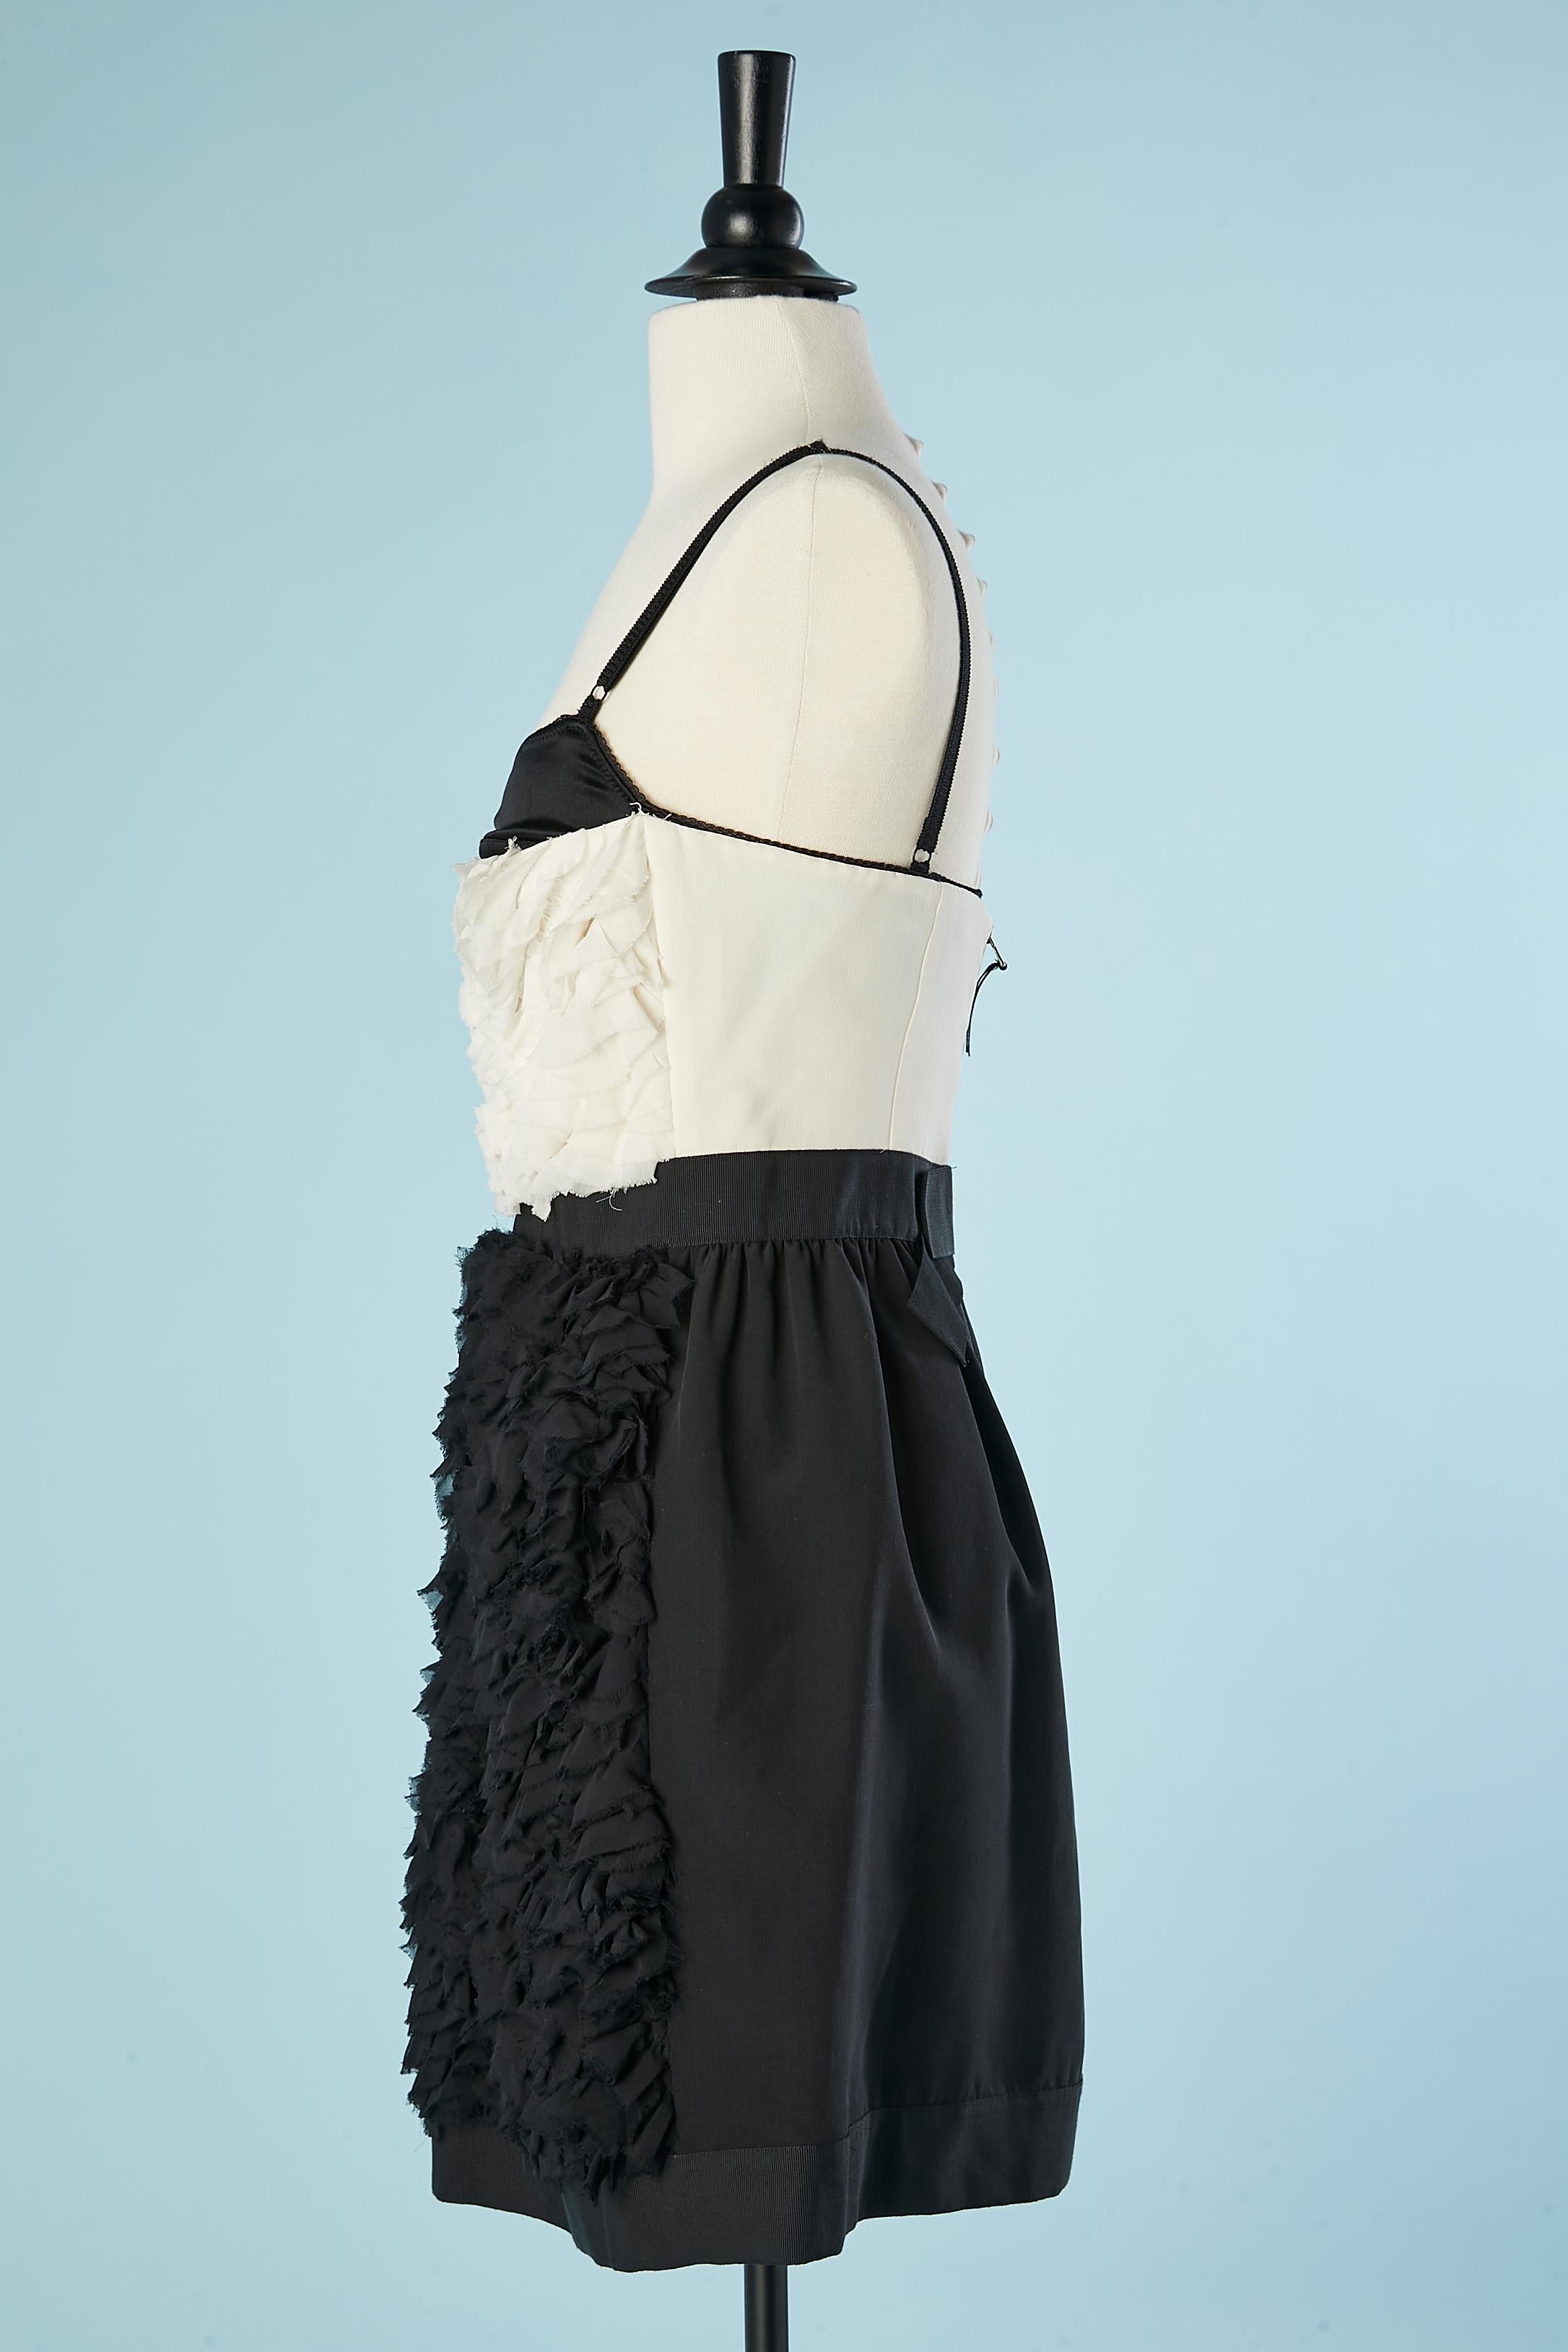 Women's Black and white ruffles cocktail dress with apparent  bra D&G Dolce & Gabbana  For Sale